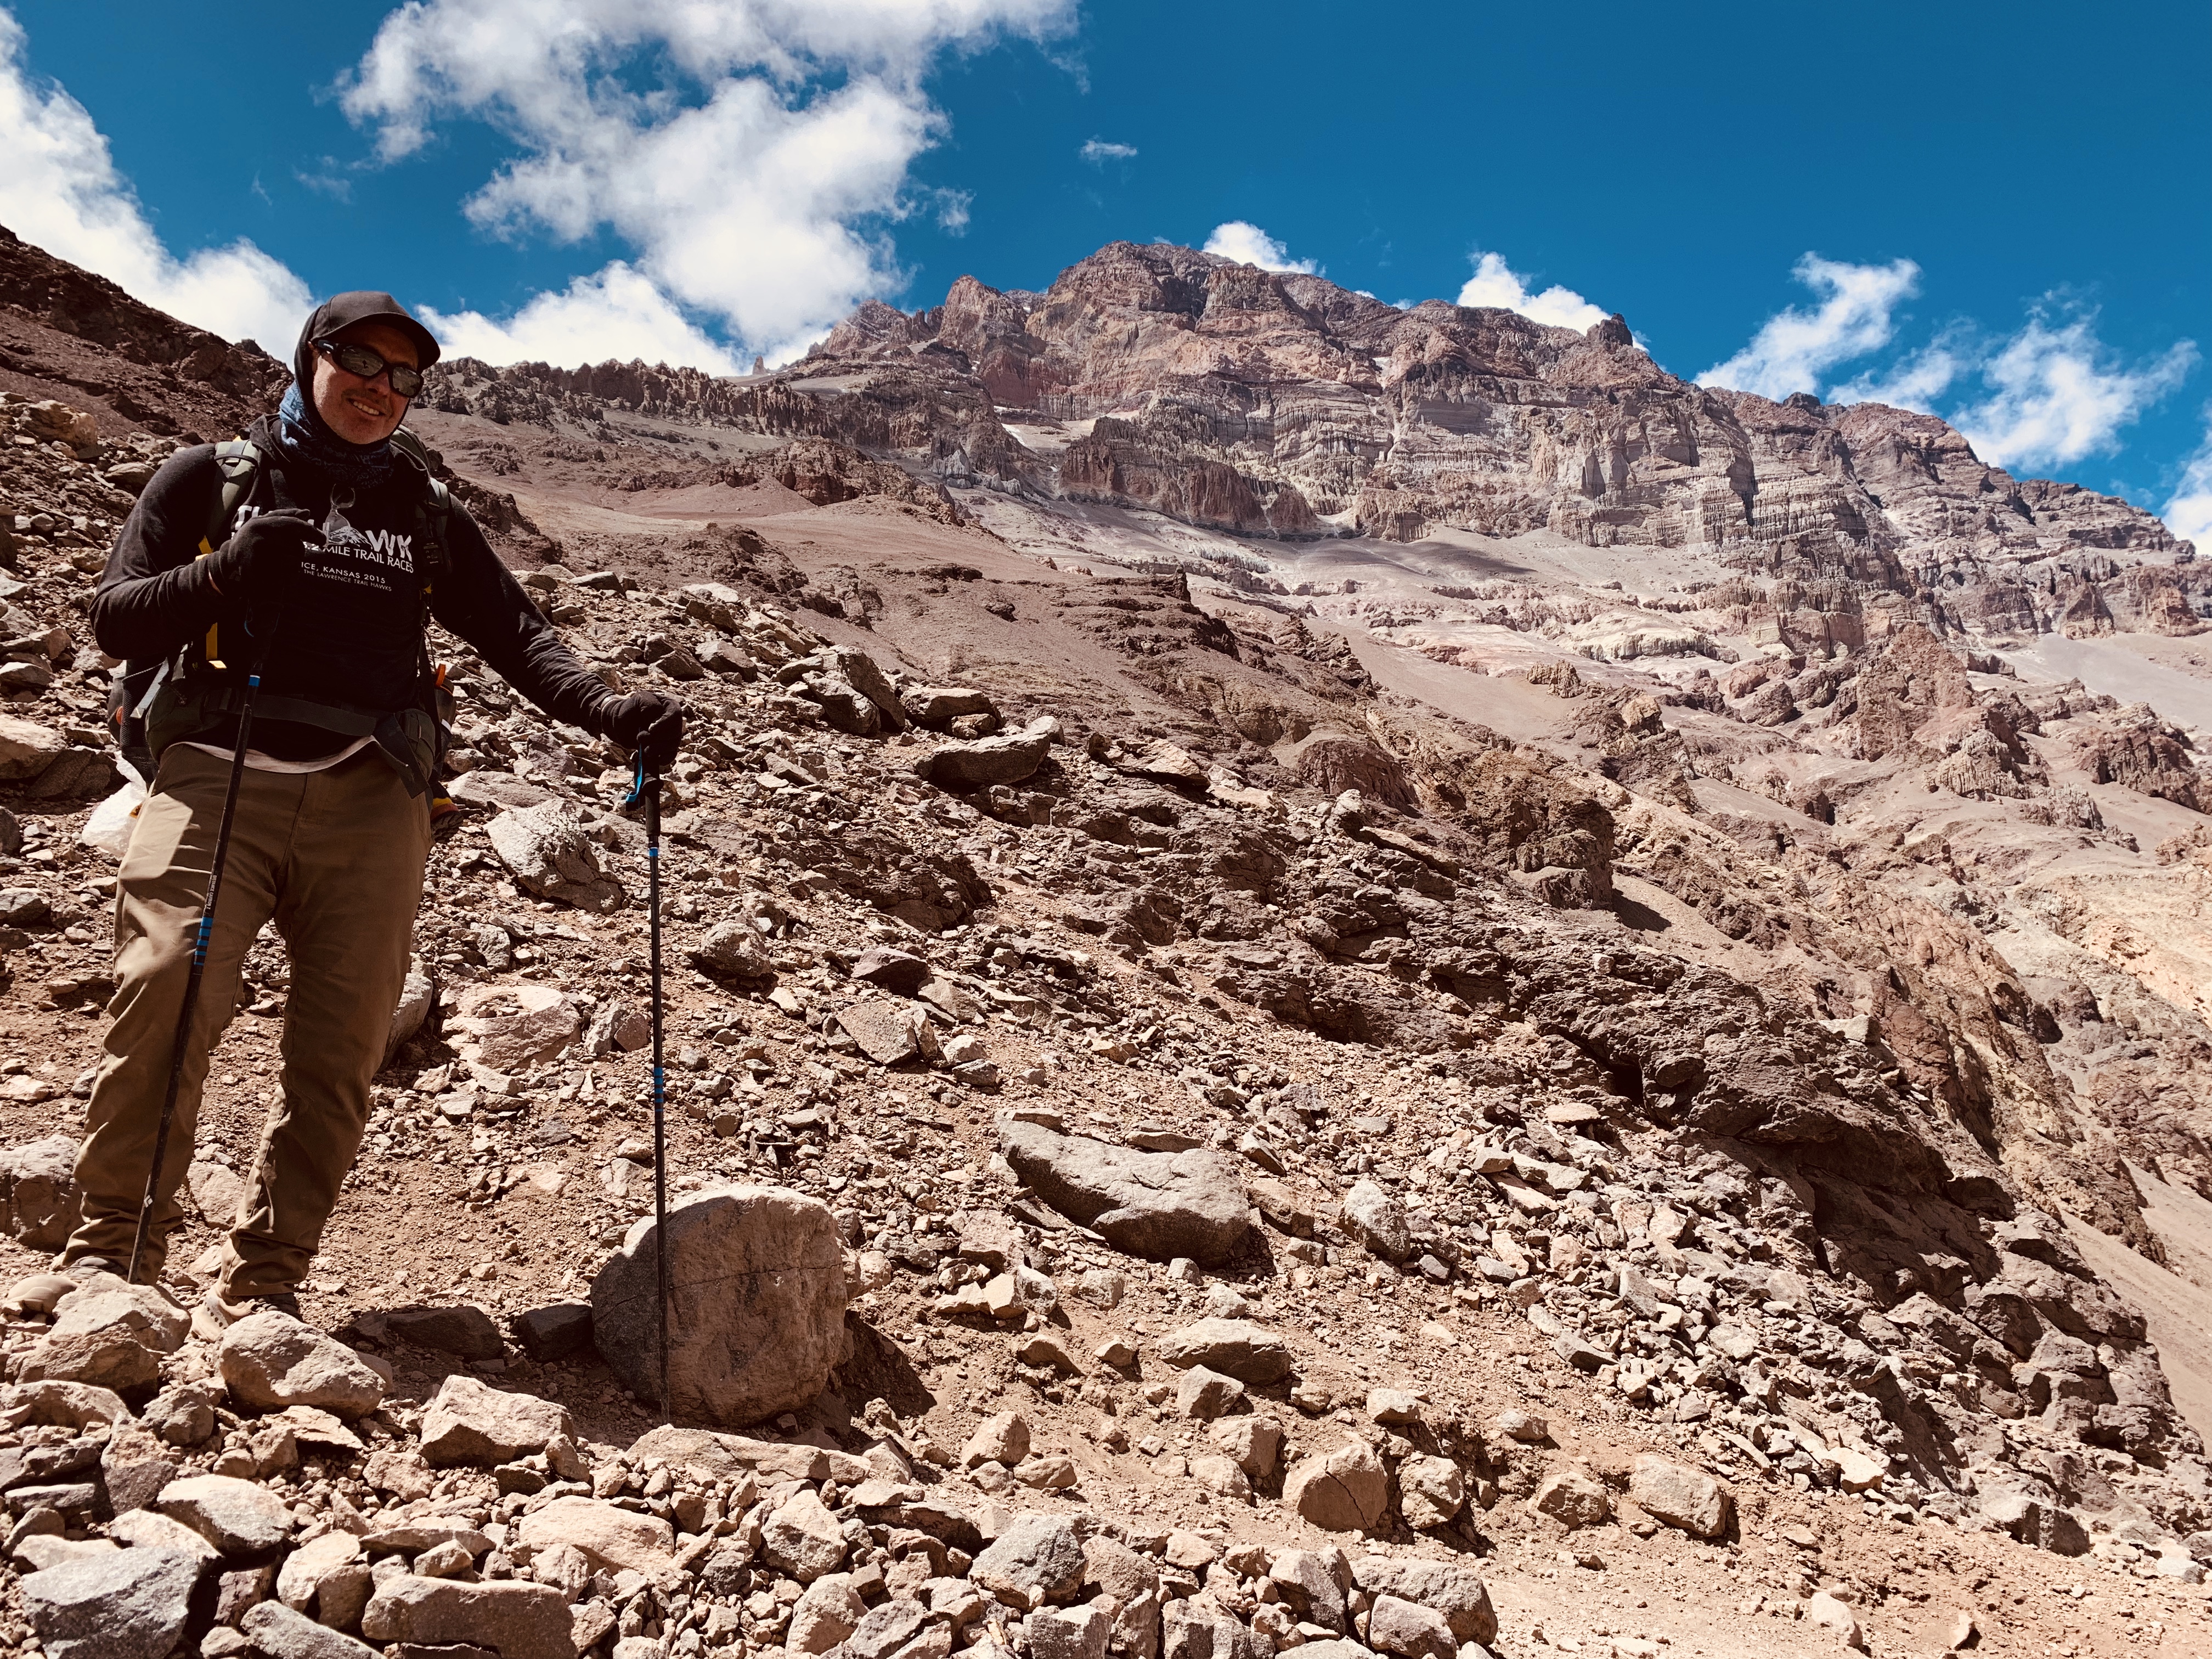 Training for the descent on Aconcagua